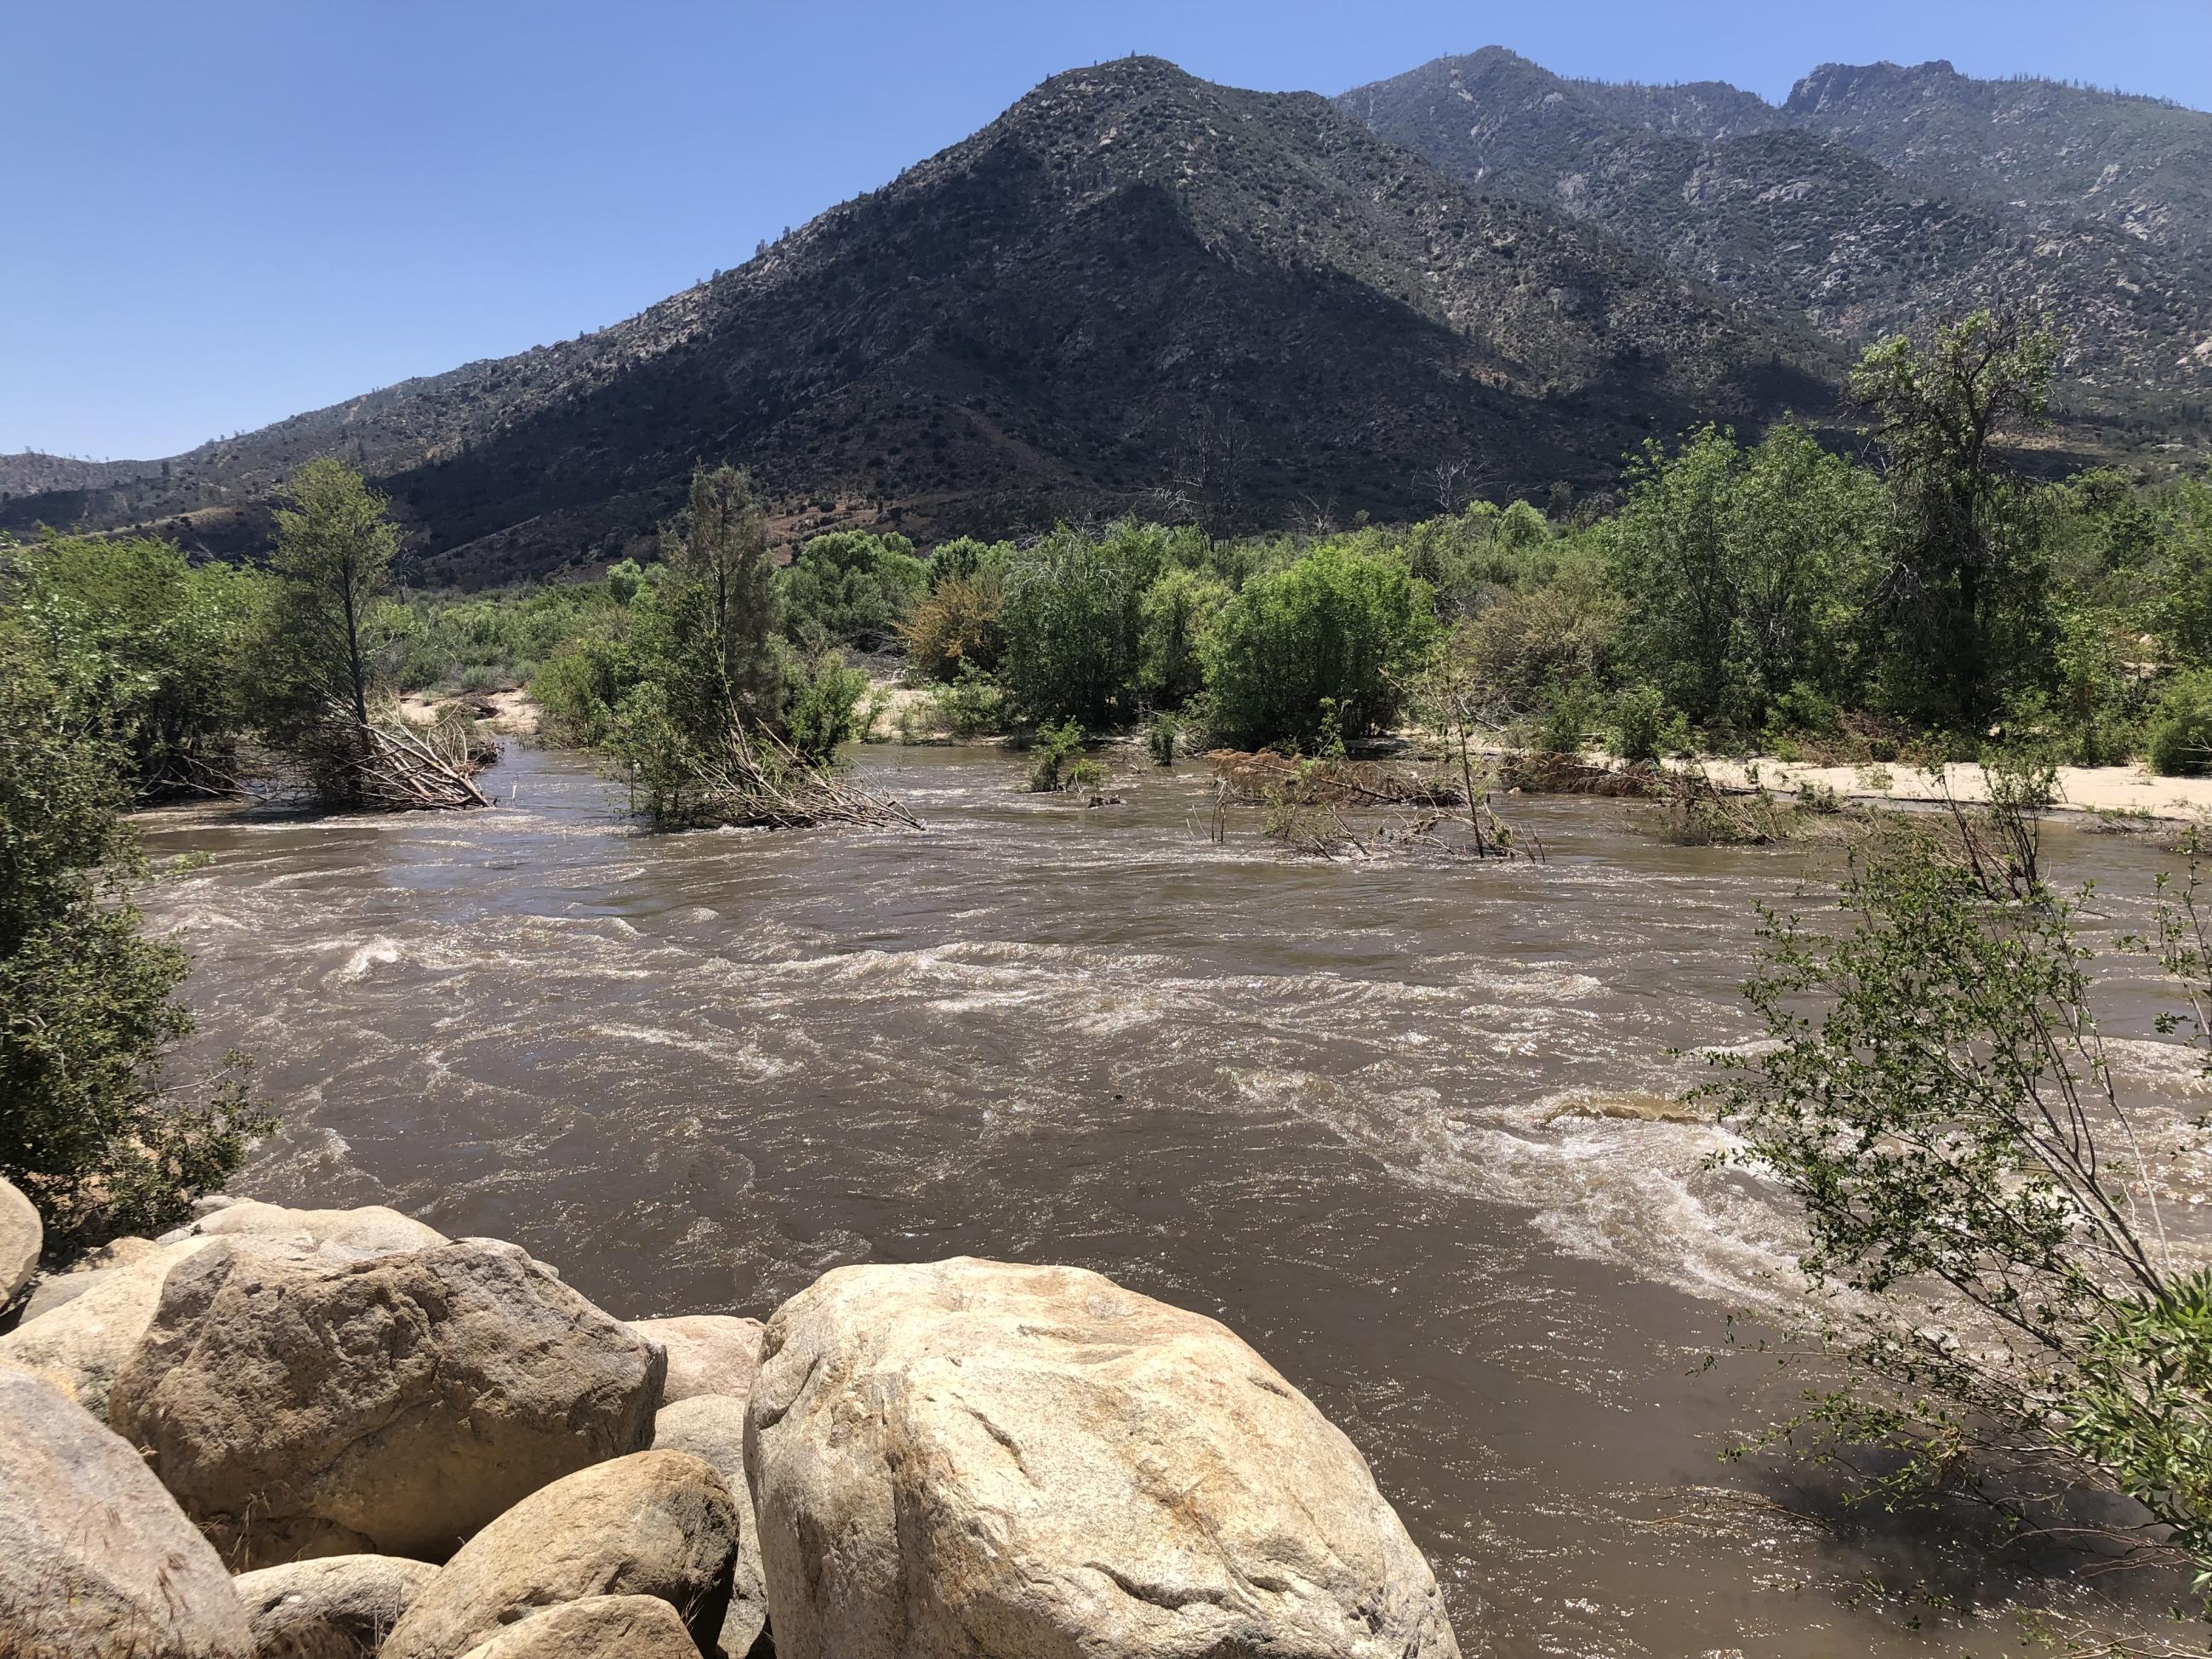 The Kern River is flooding over its riverbanks.  Green hills and trees in the background.